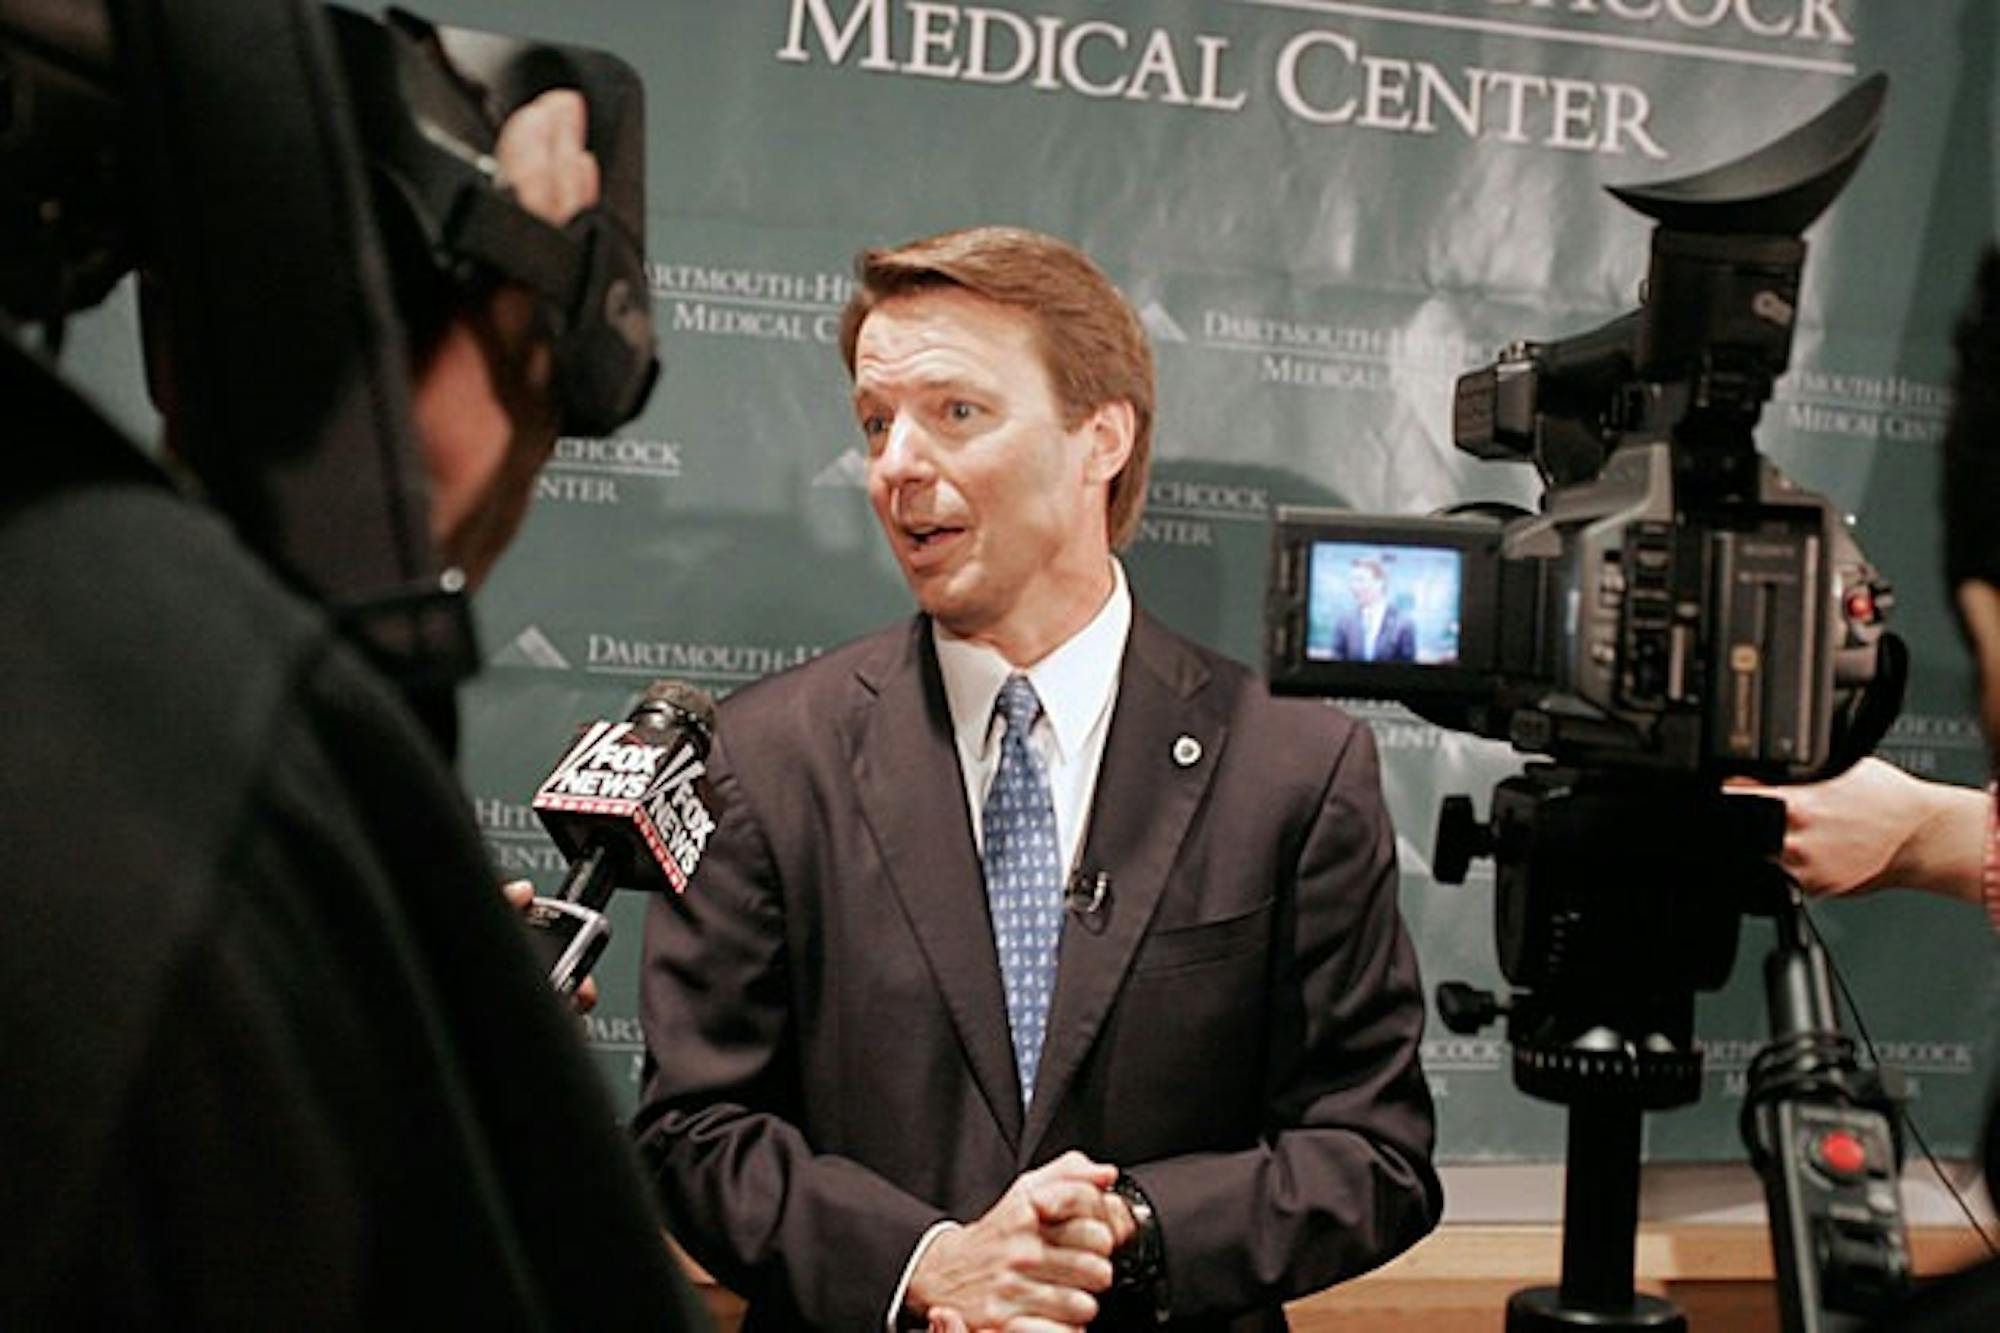 Following a John Edwards' speech at DHMC, a question-and-answer session focused on his plan to address the lack of availability to effective healthcare.